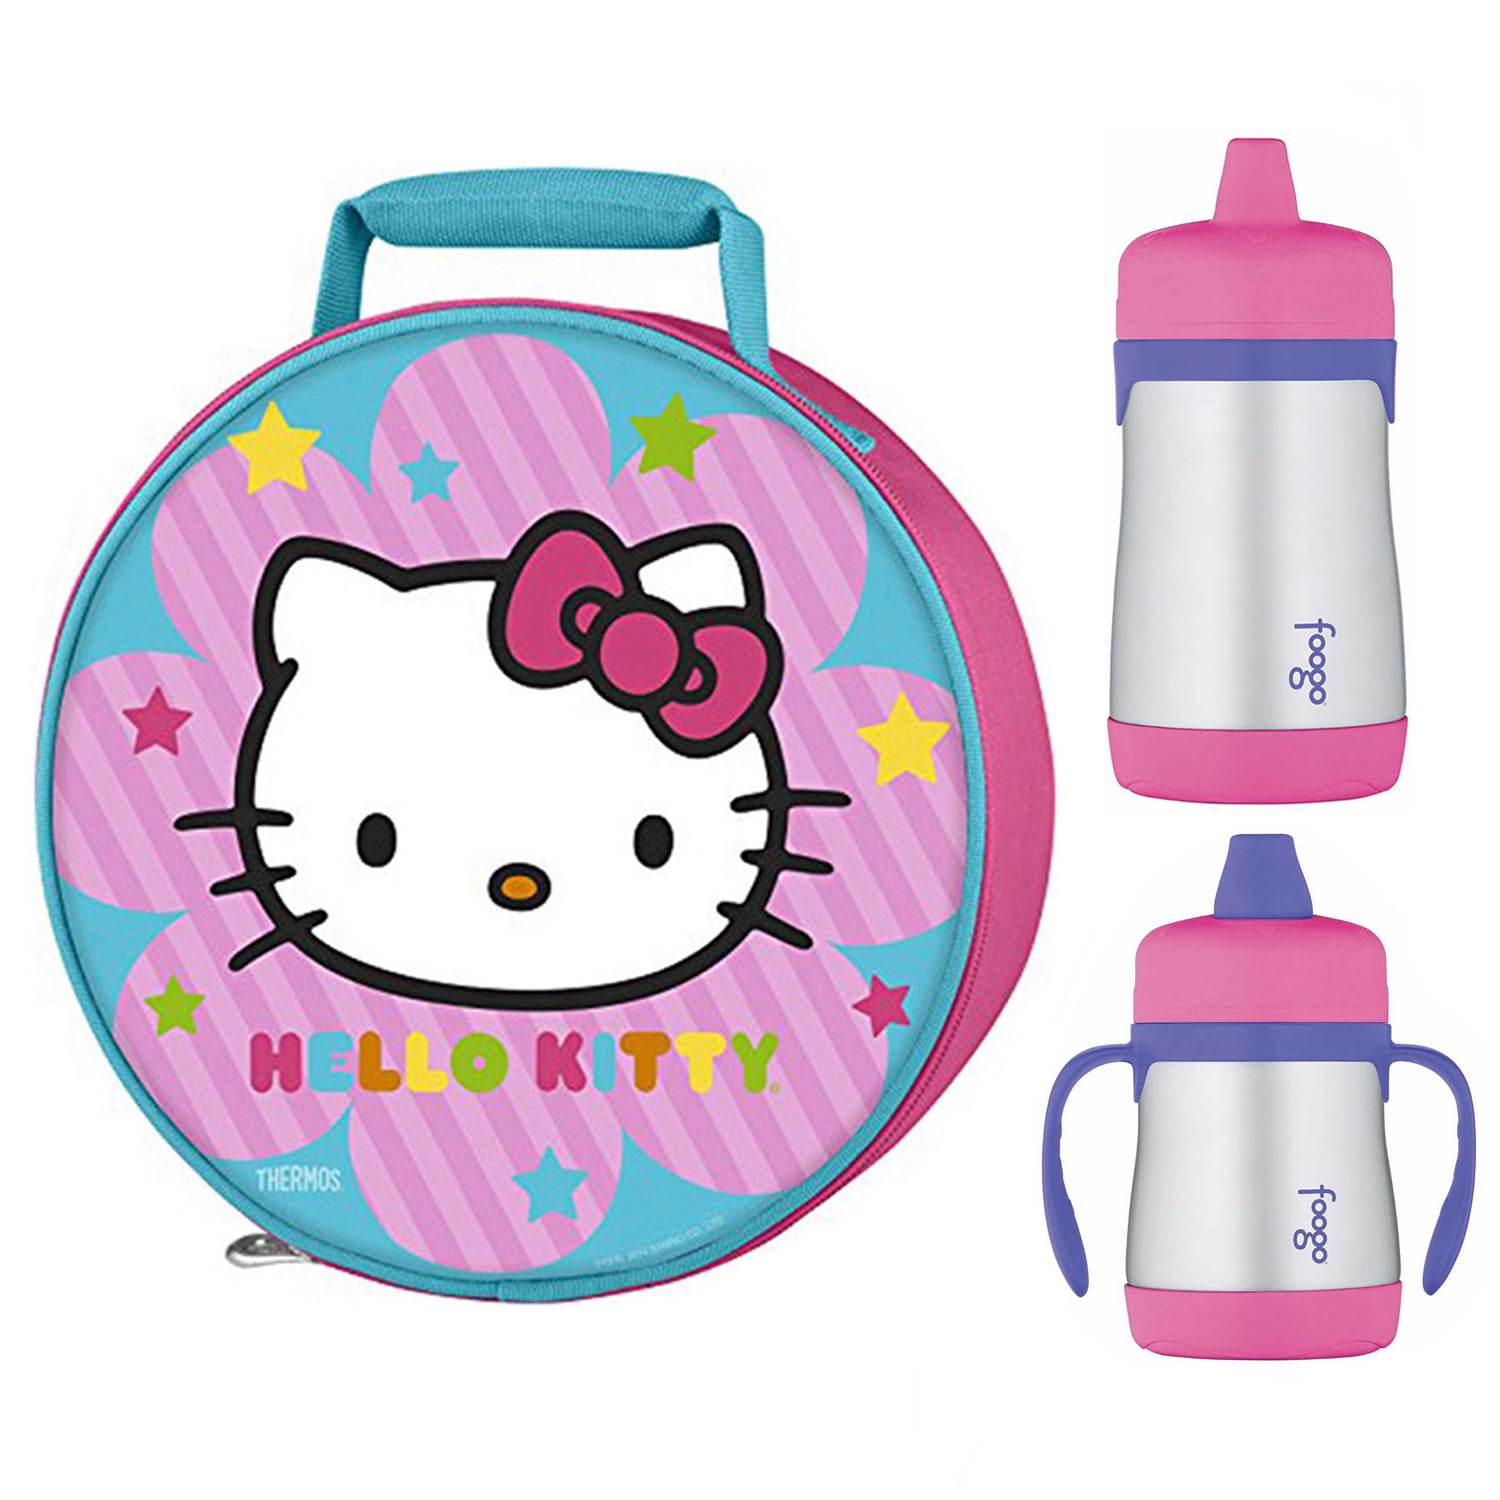 Thermos Hello Kitty Insulated Lunch Bag and Water Bottle Set